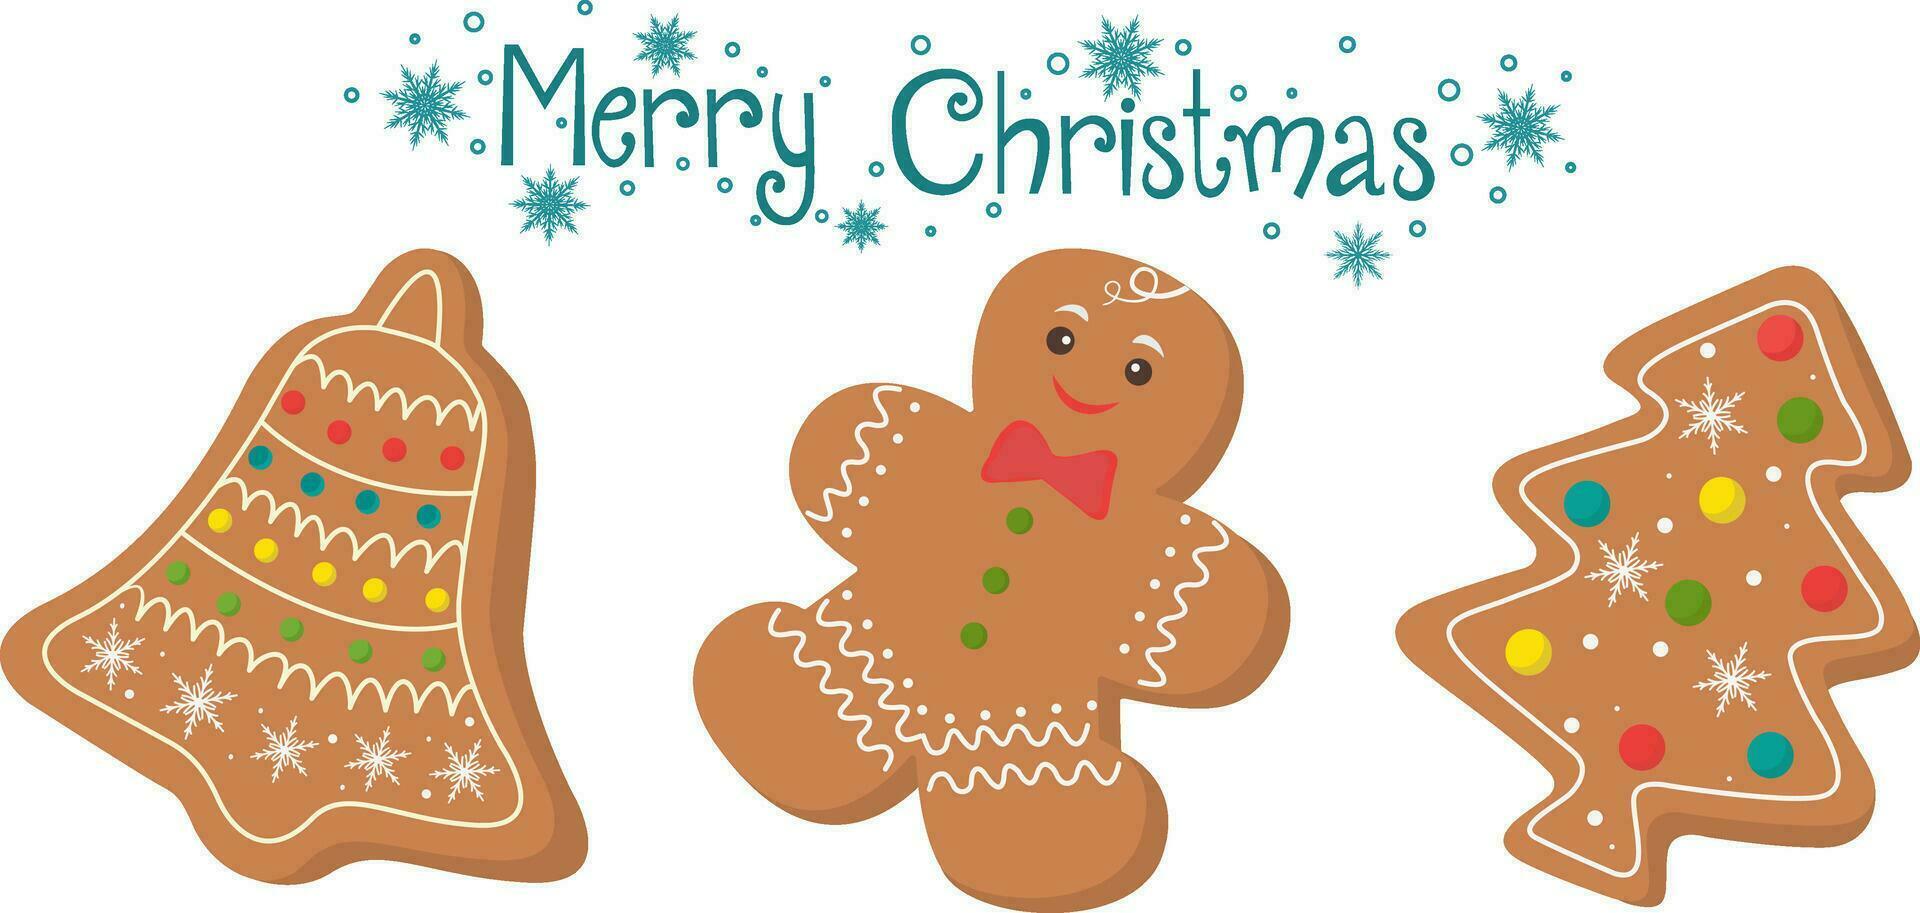 Christmas gingerbread. Winter holiday sweets in the form of a bell, a gingerbread man and a Christmas tree. Cartoon vector illustration